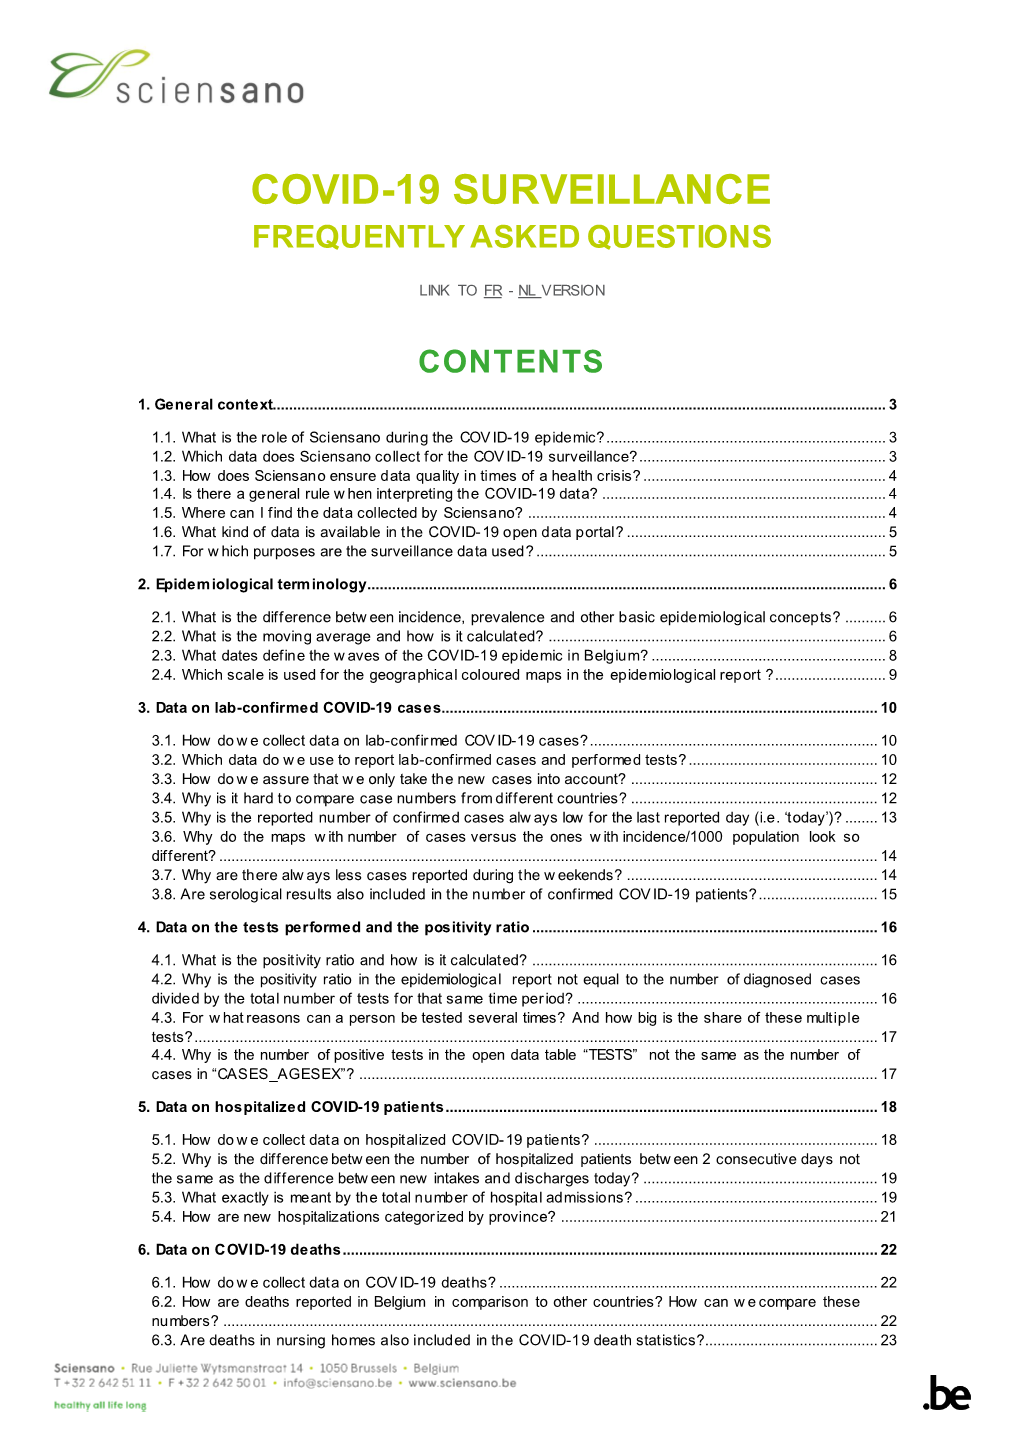 Covid-19 Surveillance Frequently Asked Questions